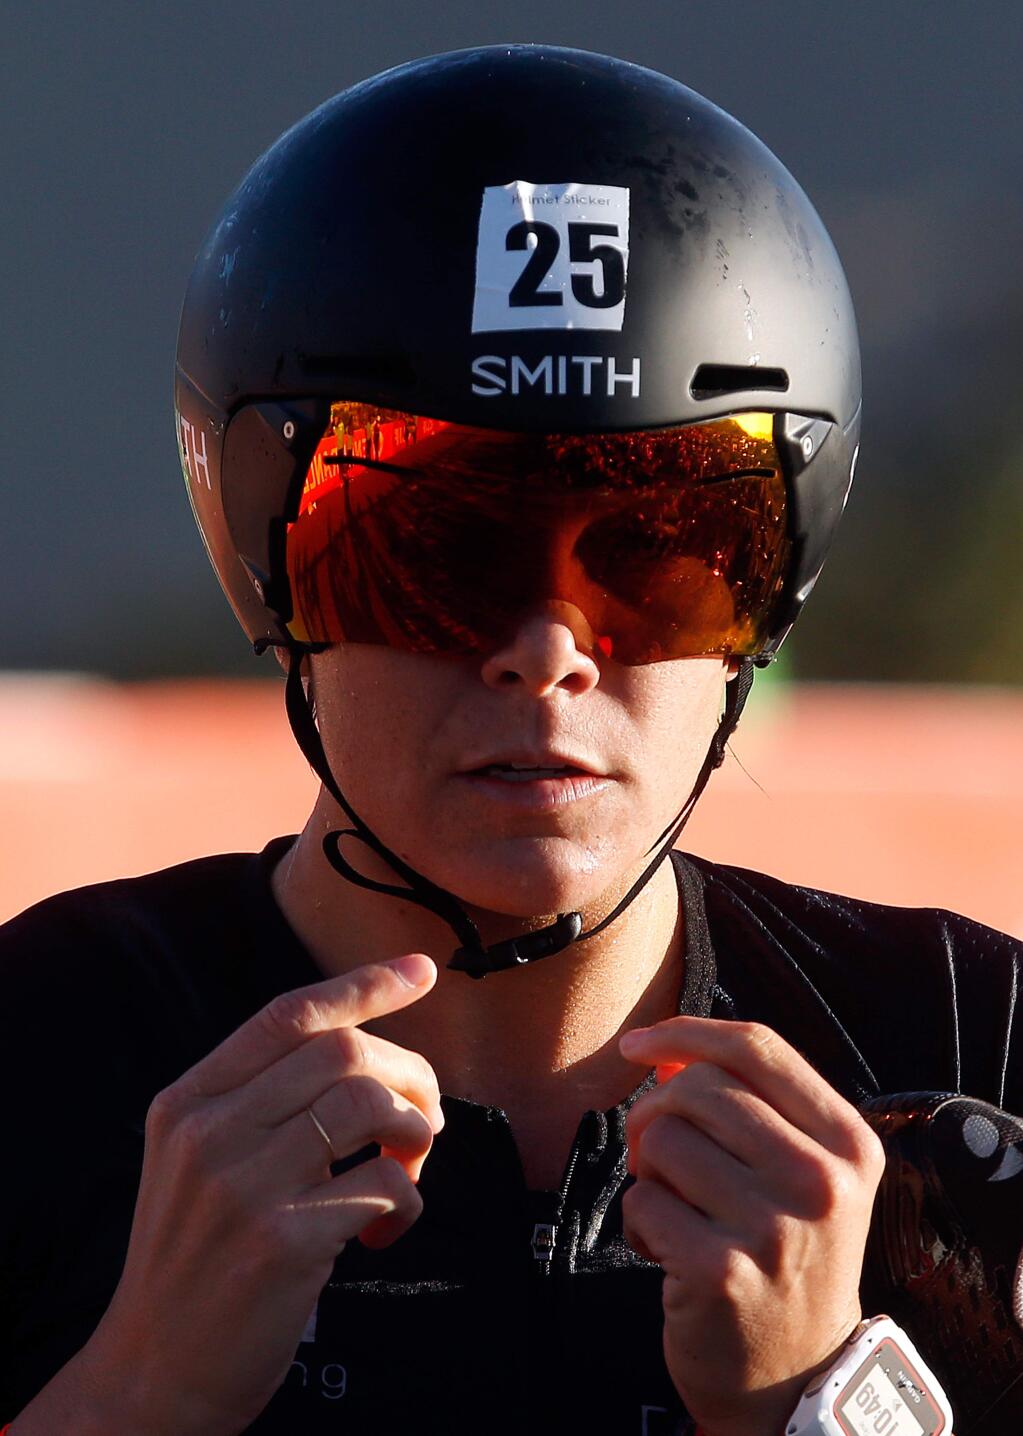 Triathlete Chealsea Tiner fastens her helmet before embarking on the 112-mile cycle stage during Ironman Santa Rosa at Lake Sonoma, near Geyserville, California, on Saturday, July 29, 2017. (Alvin Jornada / The Press Democrat)